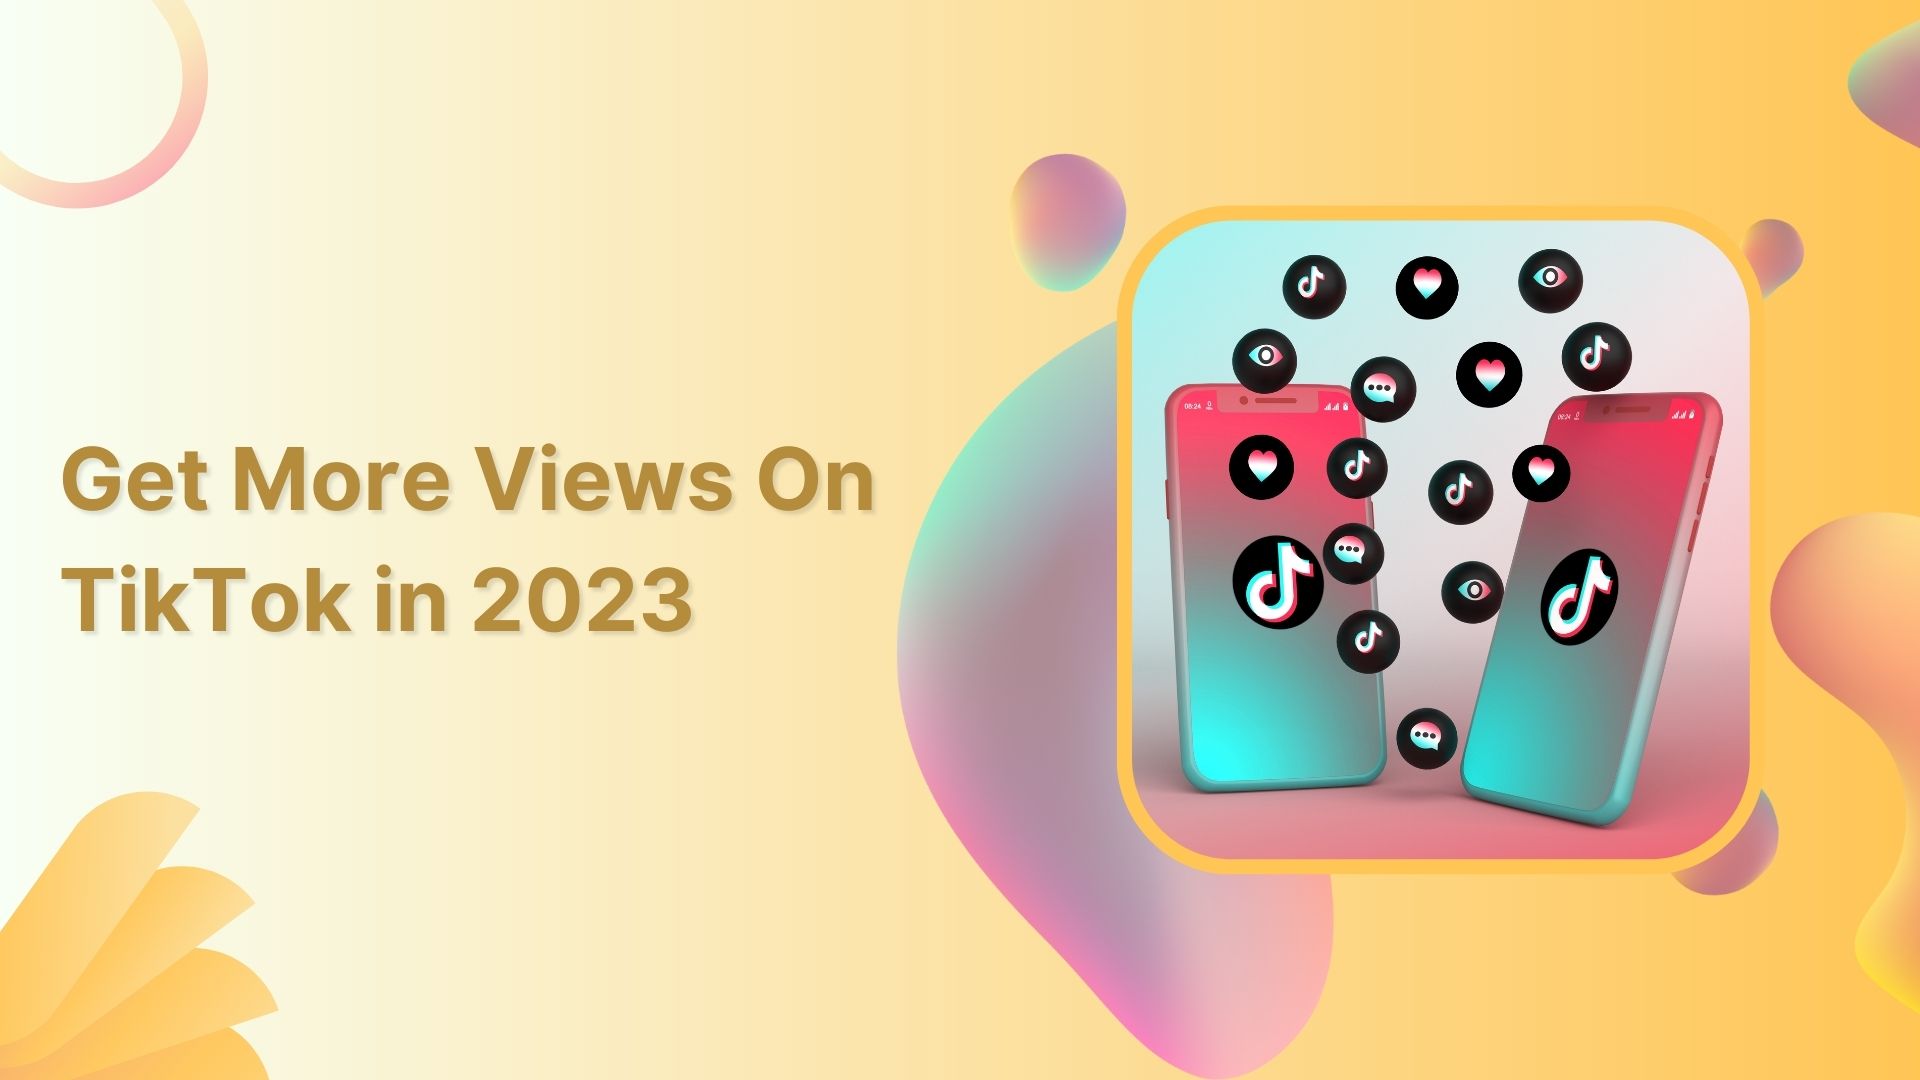 How to Get More Views on TikTok in 2023?